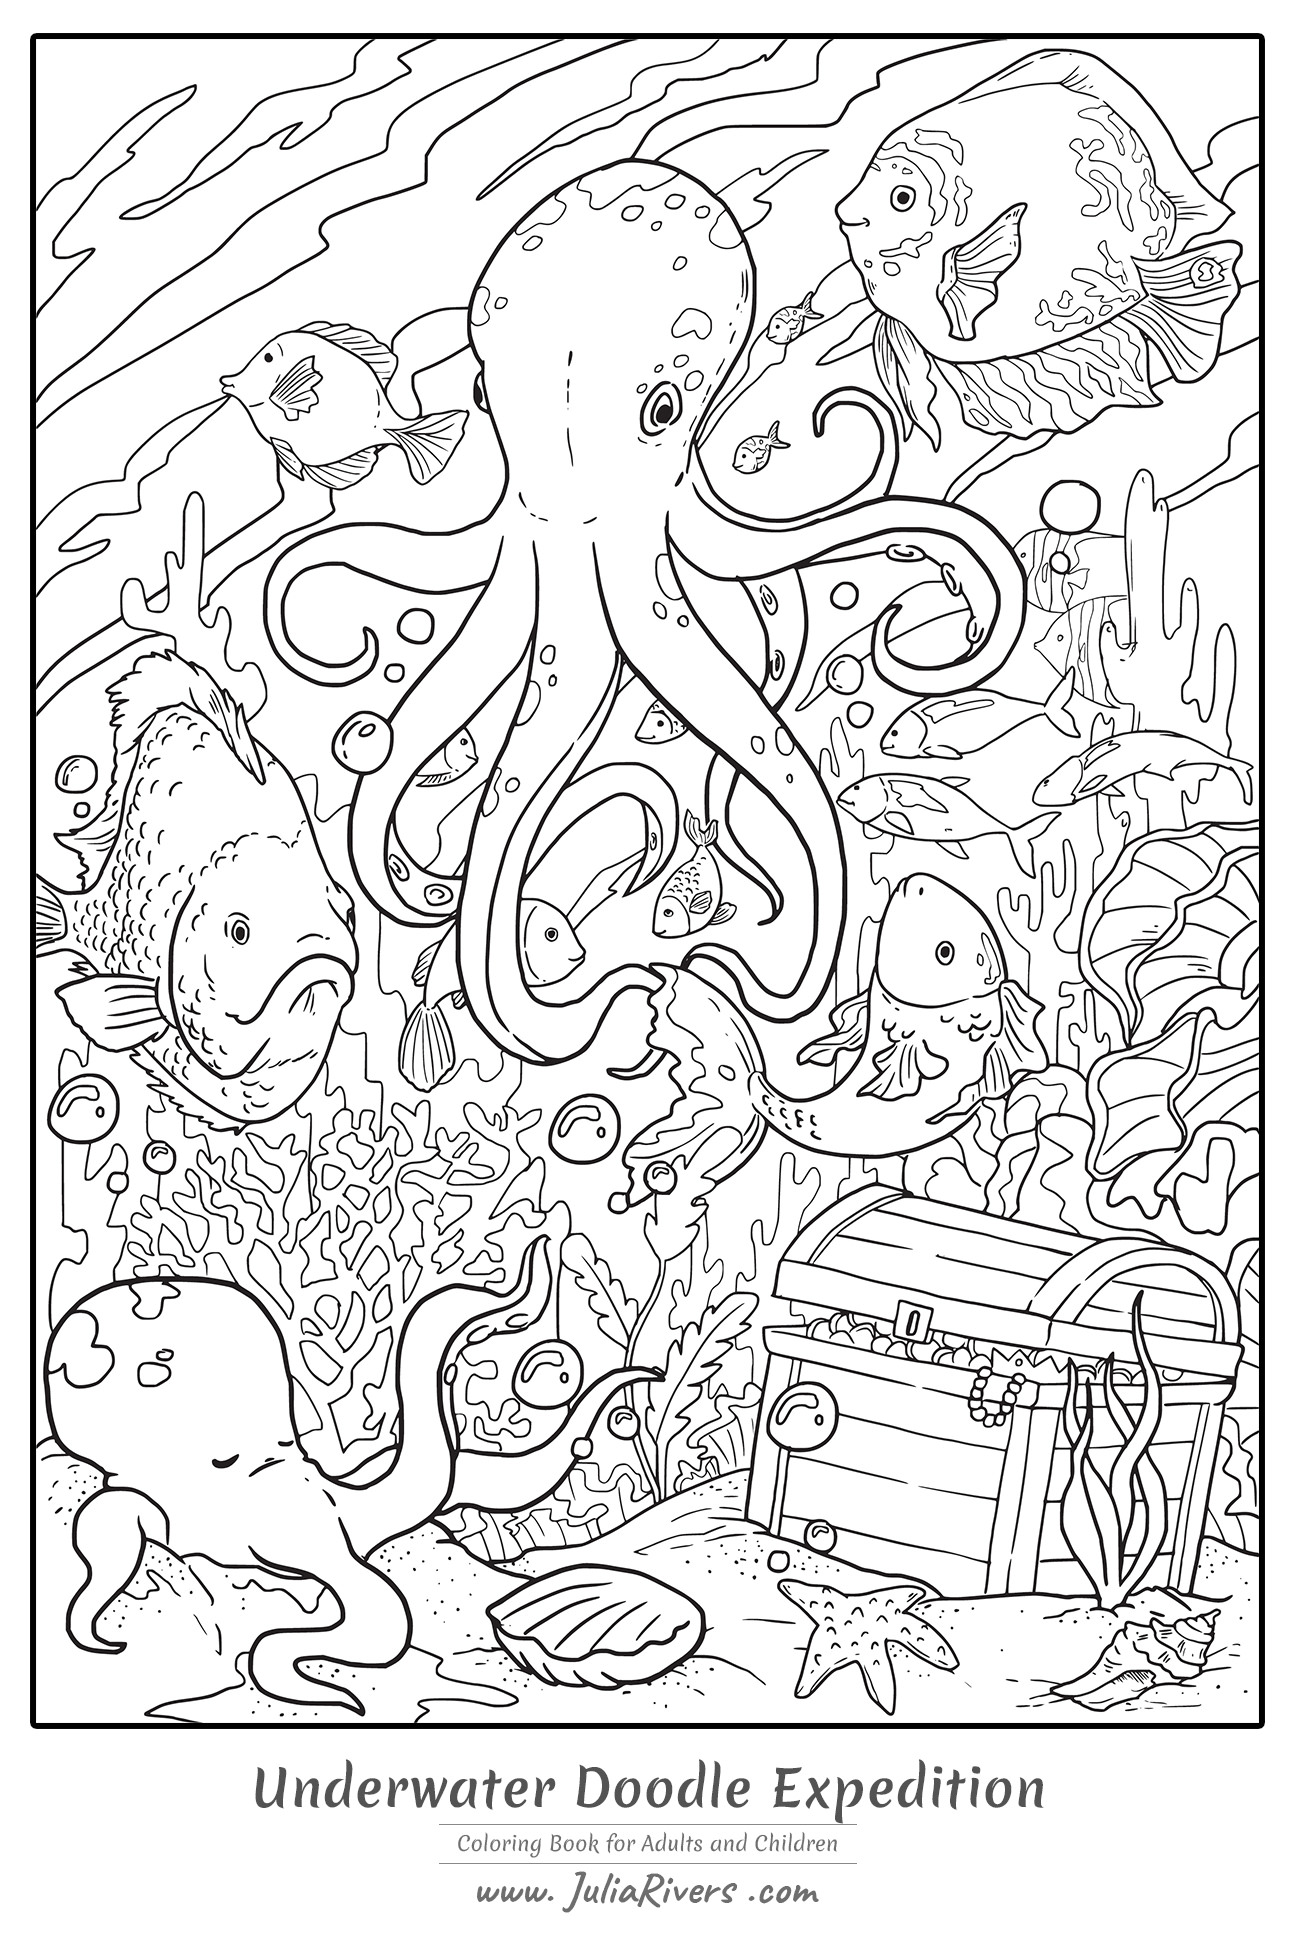 Octopus - Coloring Pages for Adults